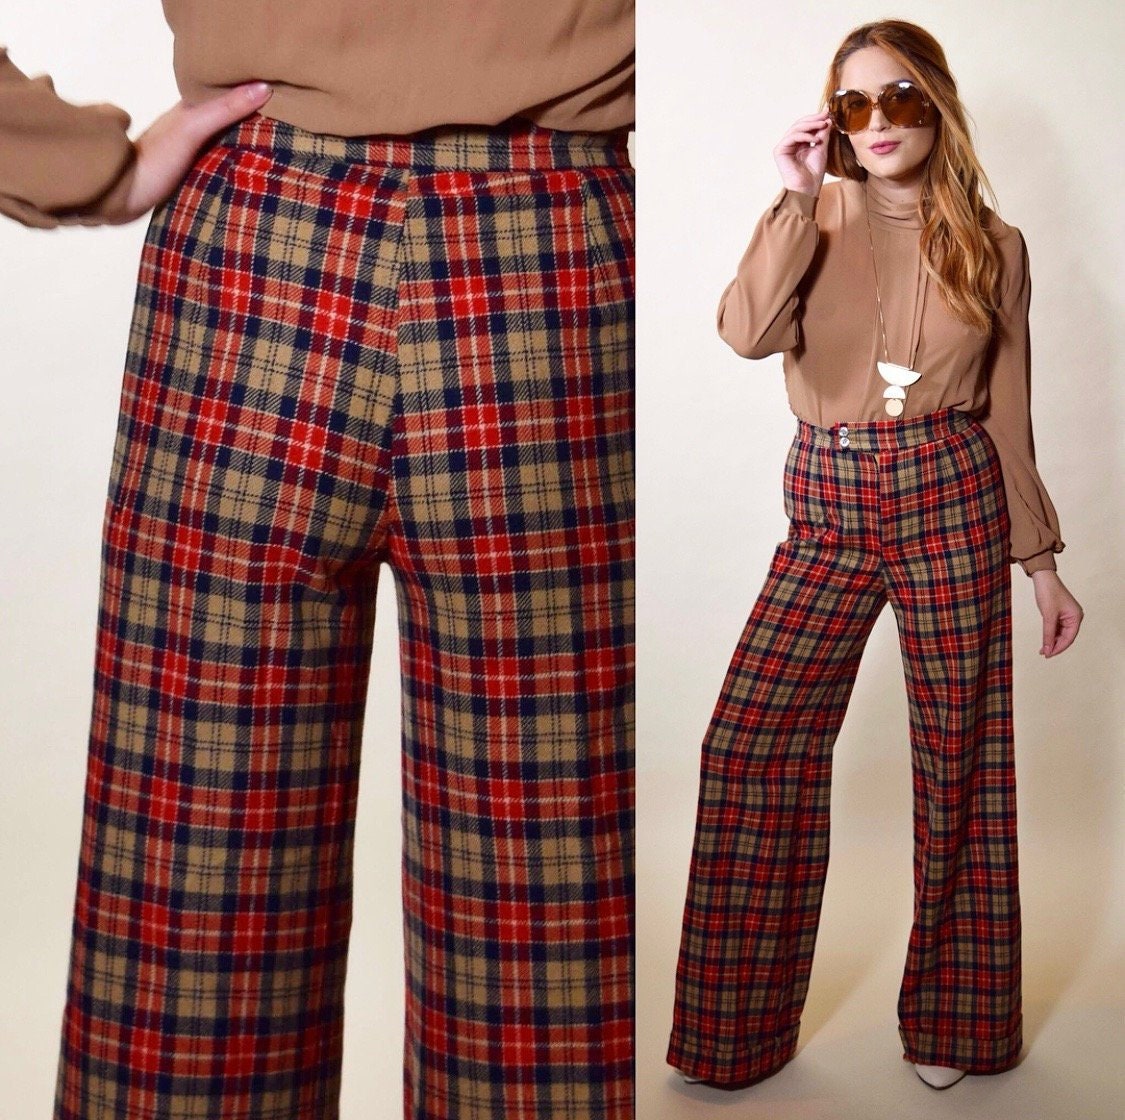 1970s authentic vintage wool plaid bell bottom high waisted pants